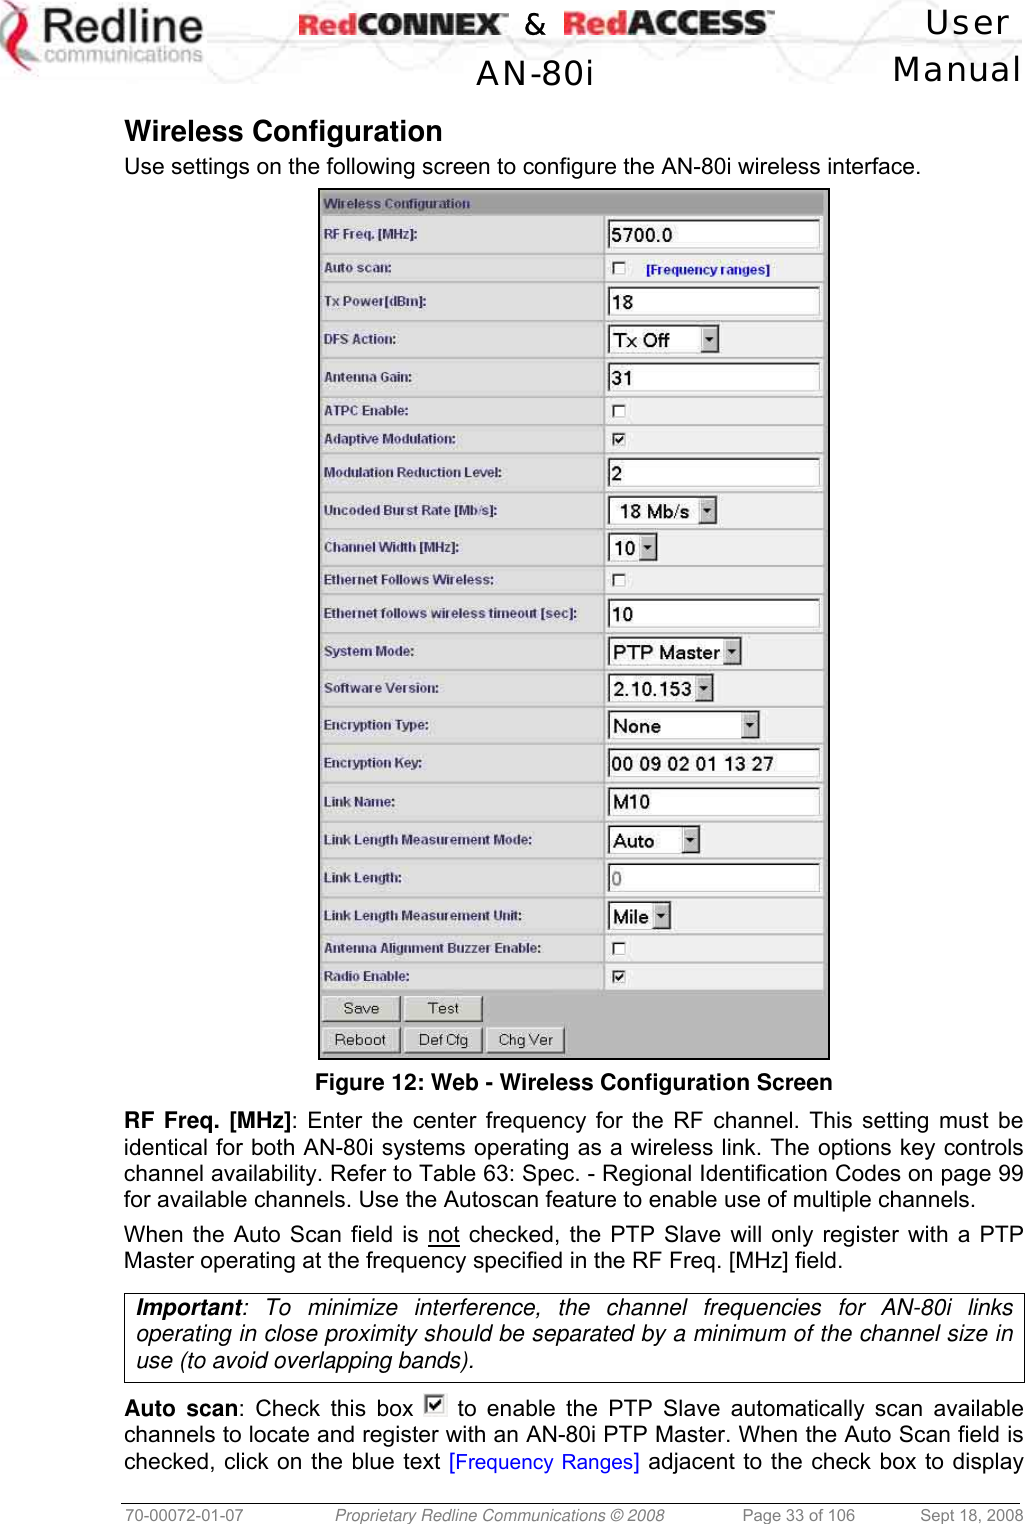    &amp;  User  AN-80i Manual  70-00072-01-07  Proprietary Redline Communications © 2008  Page 33 of 106  Sept 18, 2008  Wireless Configuration Use settings on the following screen to configure the AN-80i wireless interface.  Figure 12: Web - Wireless Configuration Screen RF Freq. [MHz]: Enter the center frequency for the RF channel. This setting must be identical for both AN-80i systems operating as a wireless link. The options key controls channel availability. Refer to Table 63: Spec. - Regional Identification Codes on page 99 for available channels. Use the Autoscan feature to enable use of multiple channels. When the Auto Scan field is not checked, the PTP Slave will only register with a PTP Master operating at the frequency specified in the RF Freq. [MHz] field.  Important: To minimize interference, the channel frequencies for AN-80i links operating in close proximity should be separated by a minimum of the channel size in use (to avoid overlapping bands).  Auto scan: Check this box   to enable the PTP Slave automatically scan available channels to locate and register with an AN-80i PTP Master. When the Auto Scan field is checked, click on the blue text [Frequency Ranges] adjacent to the check box to display 